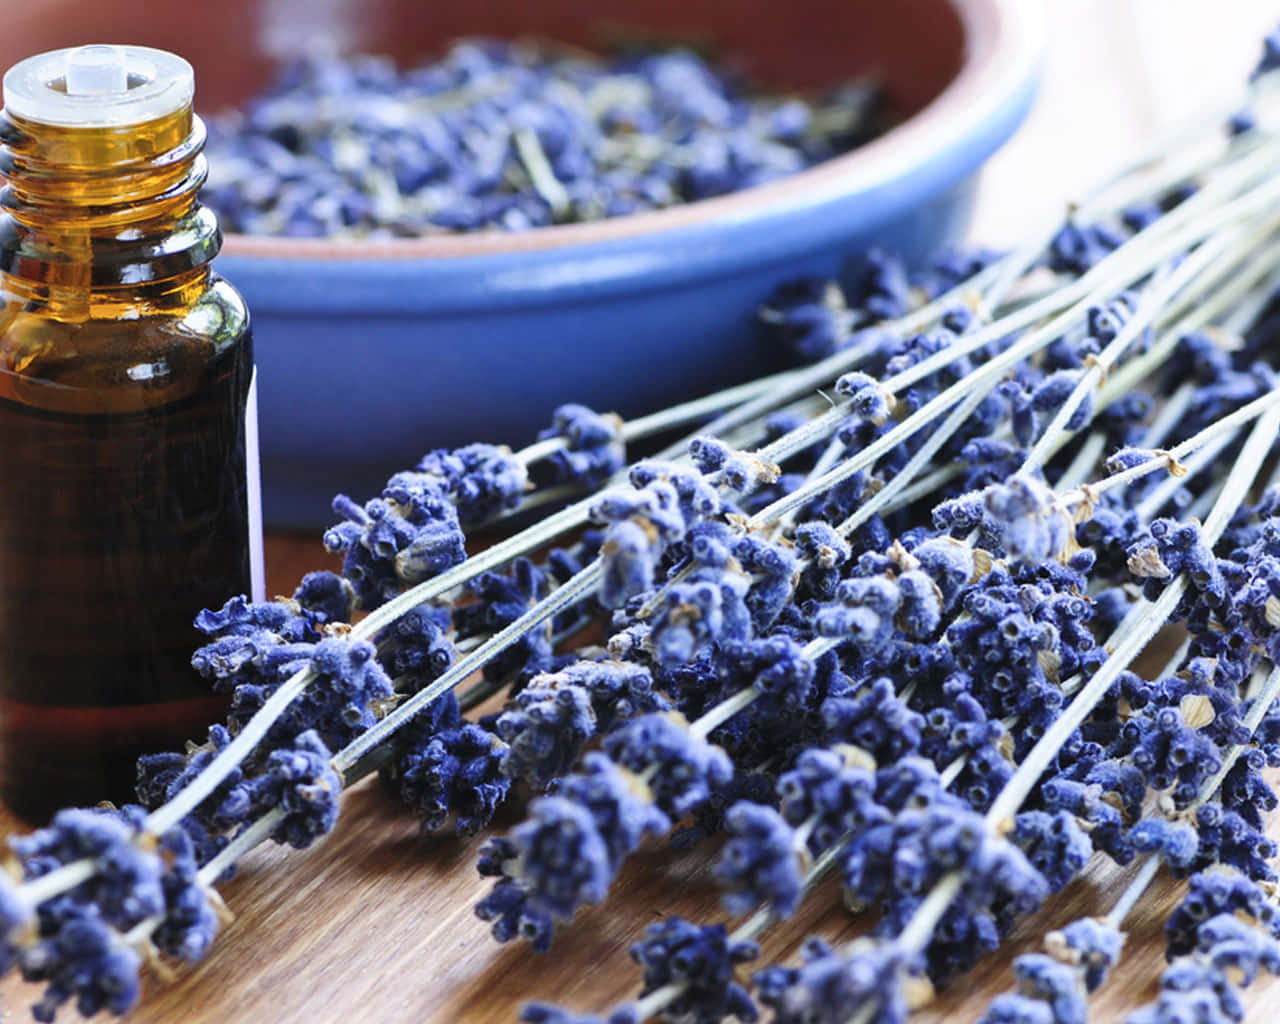 Experience the natural health benefits of essential oils Wallpaper